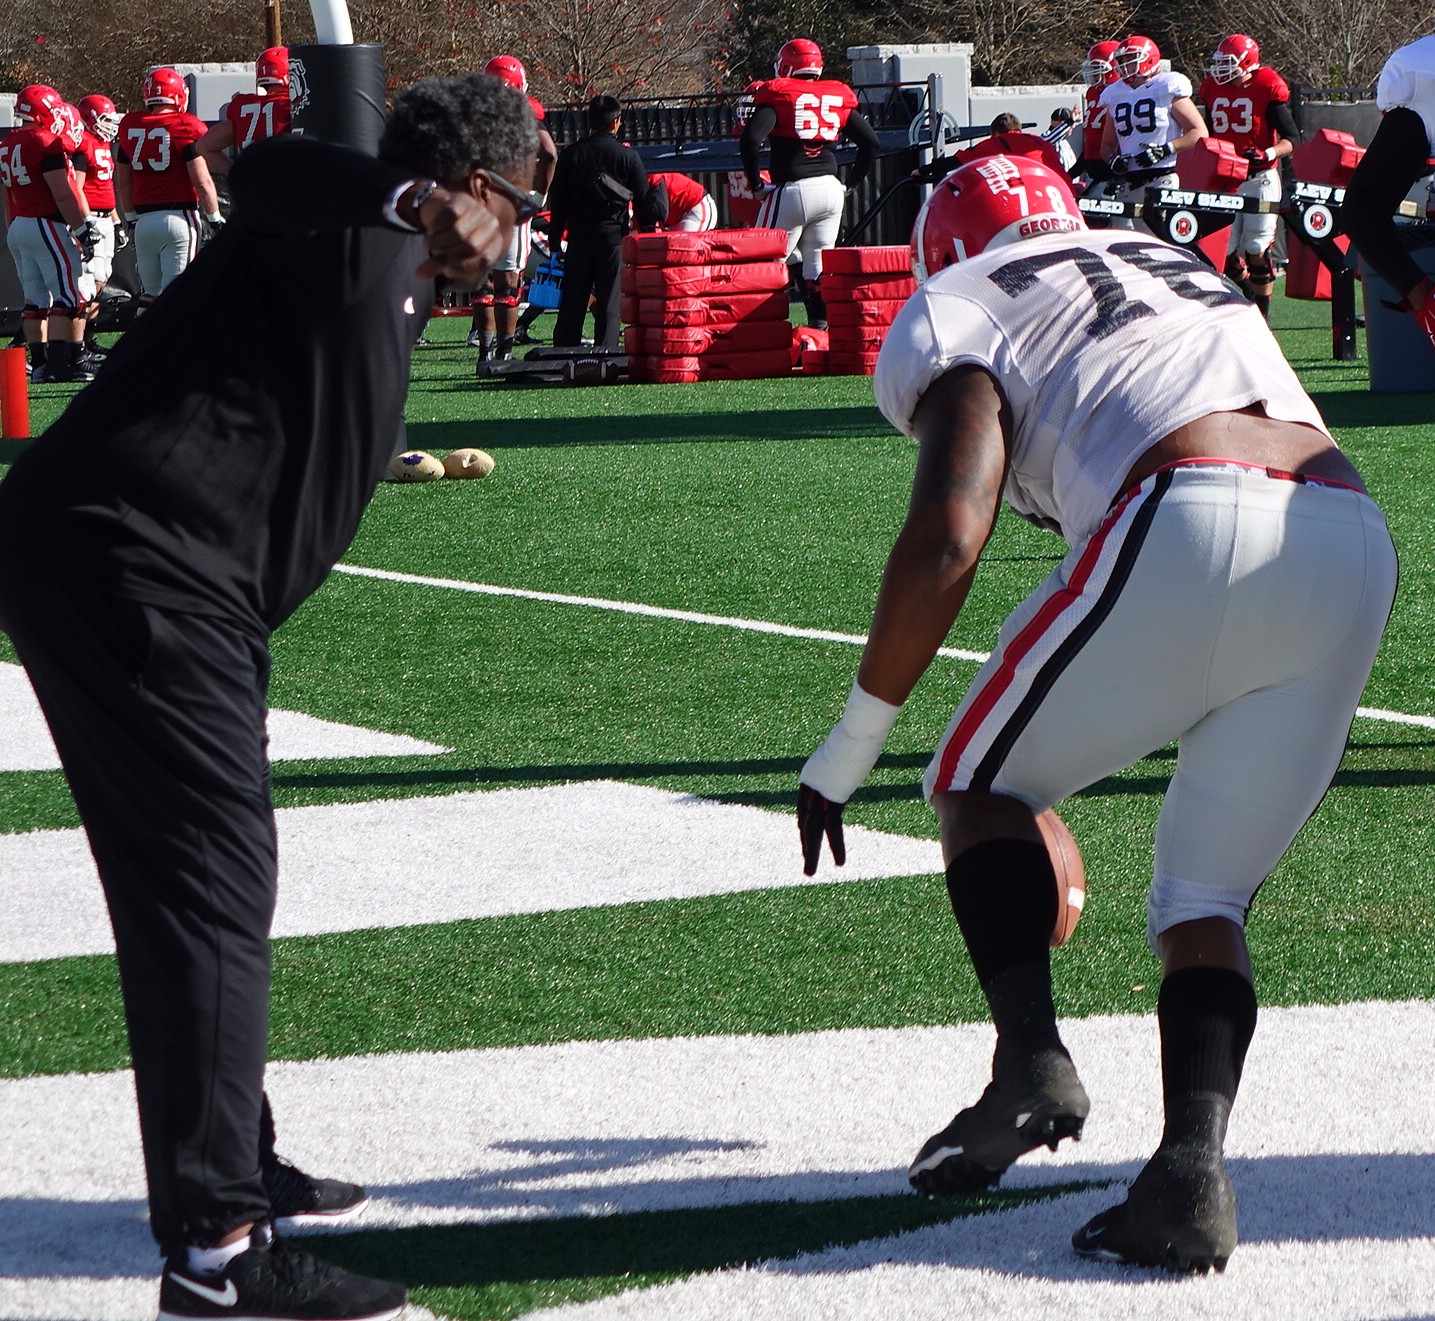 Coach Rocker encourages Trent Thompson during fumble drill